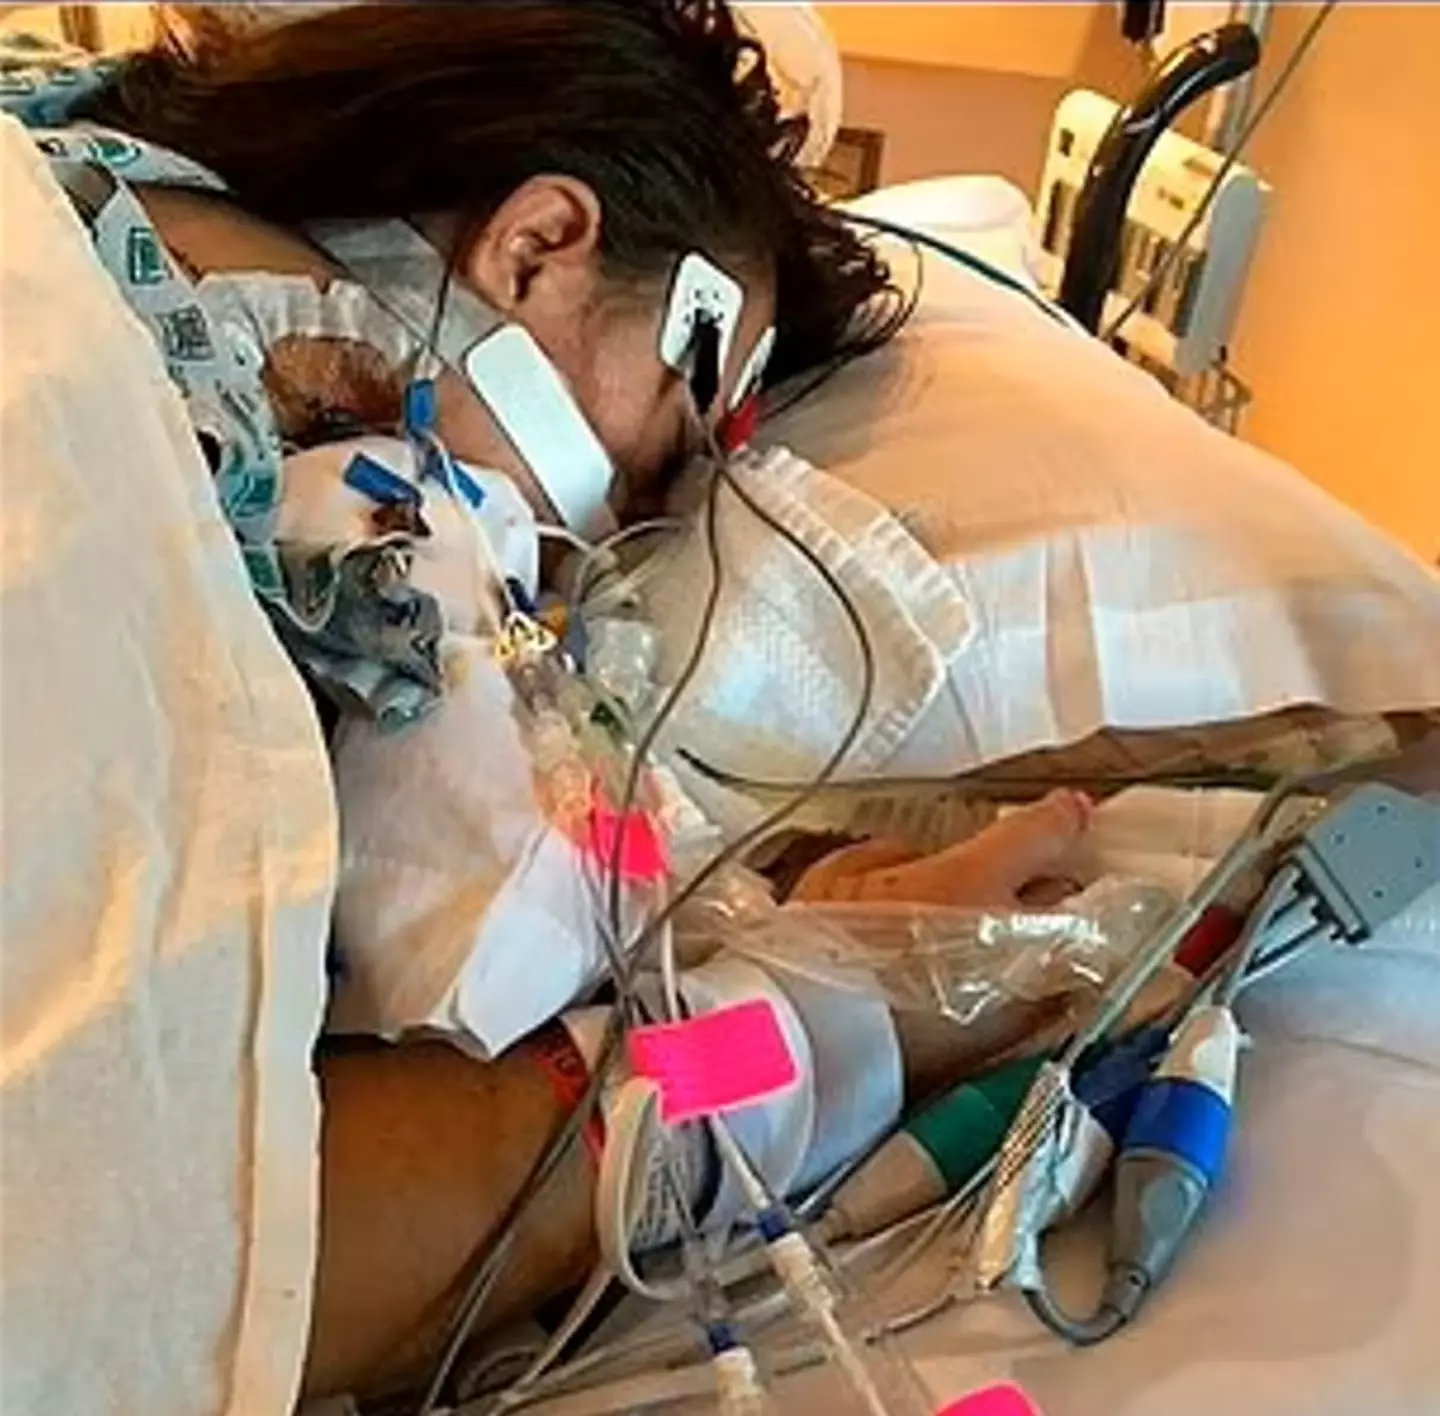 Amanda was put on life support for eight days after vaping.